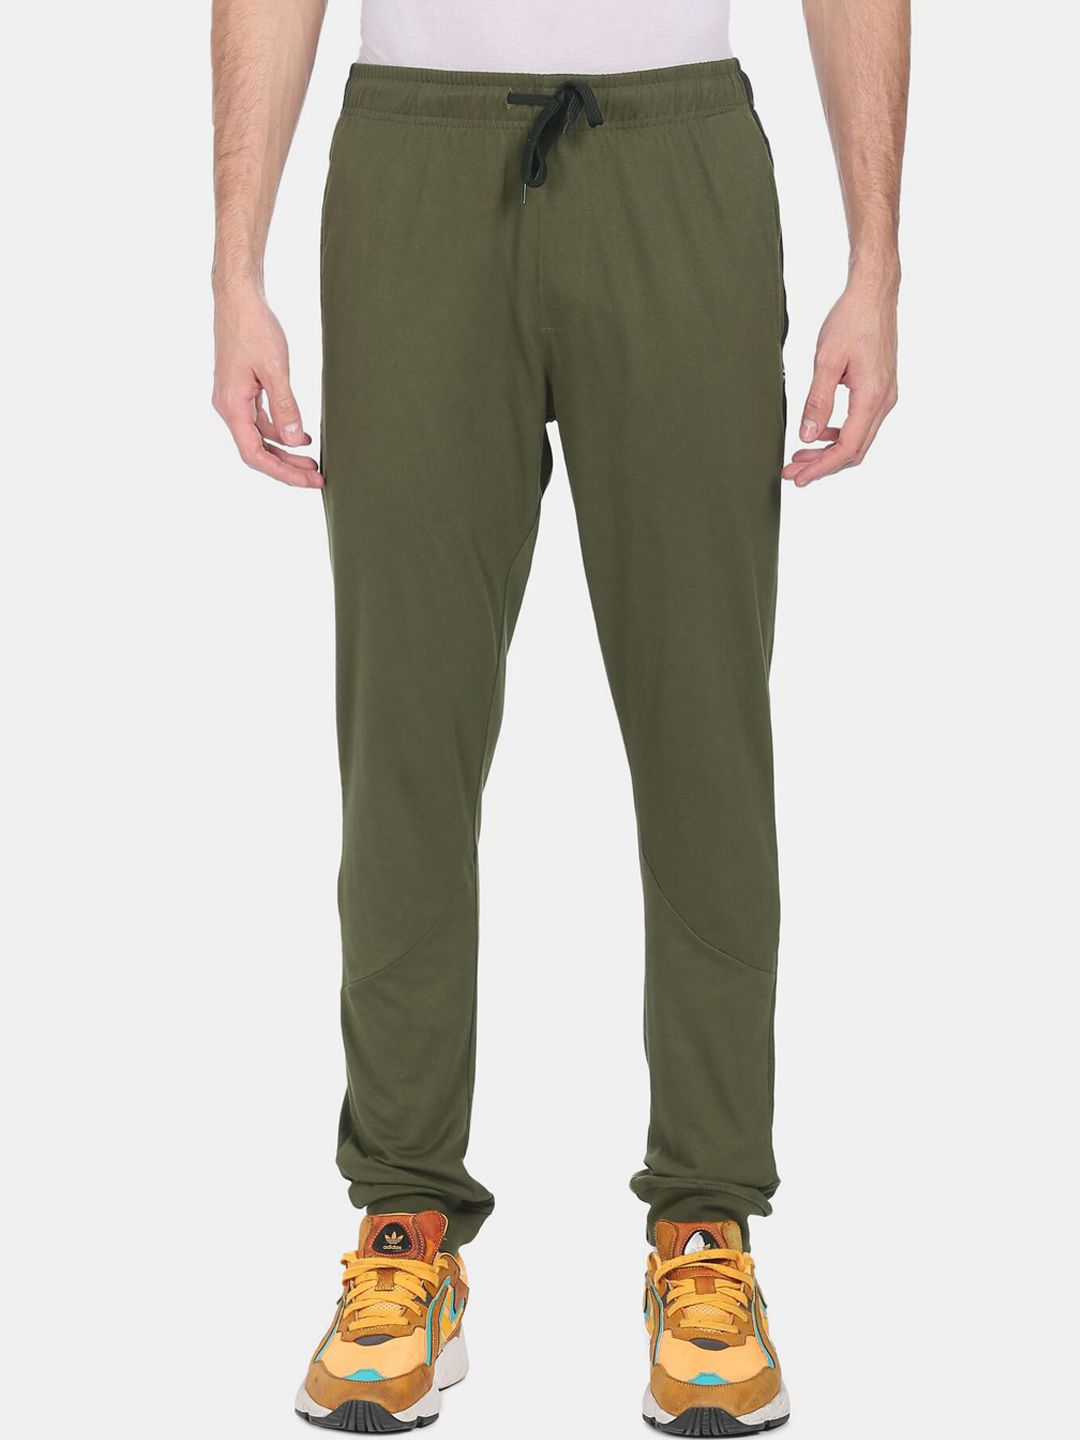 ARROW Cotton Trousers » Buy online from ShopnSafe